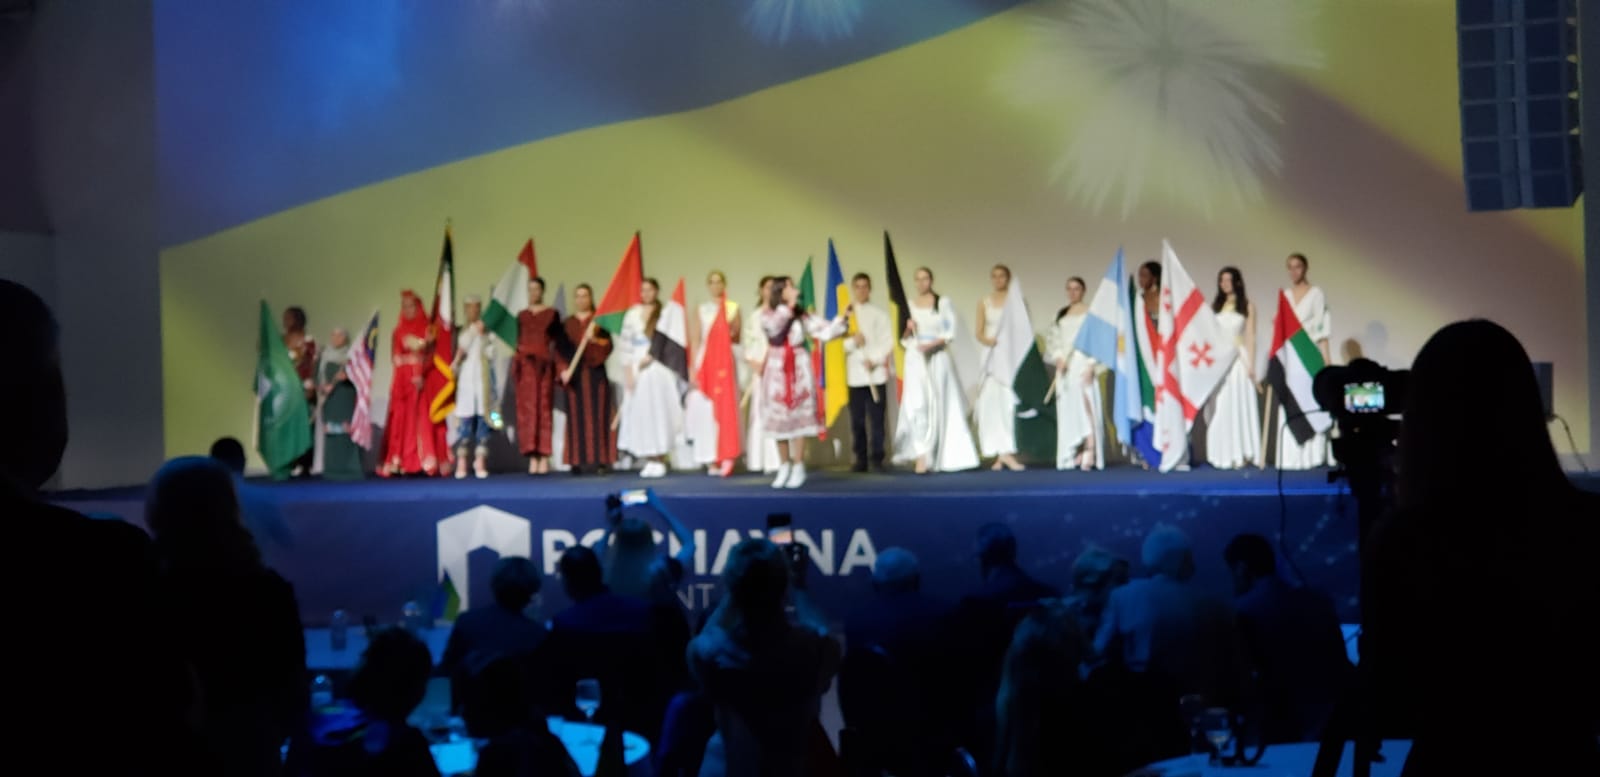 Ambassador Hashem Dajani and his spouce taking part in the International Charitable Evening "The Parade of Nations 2021"